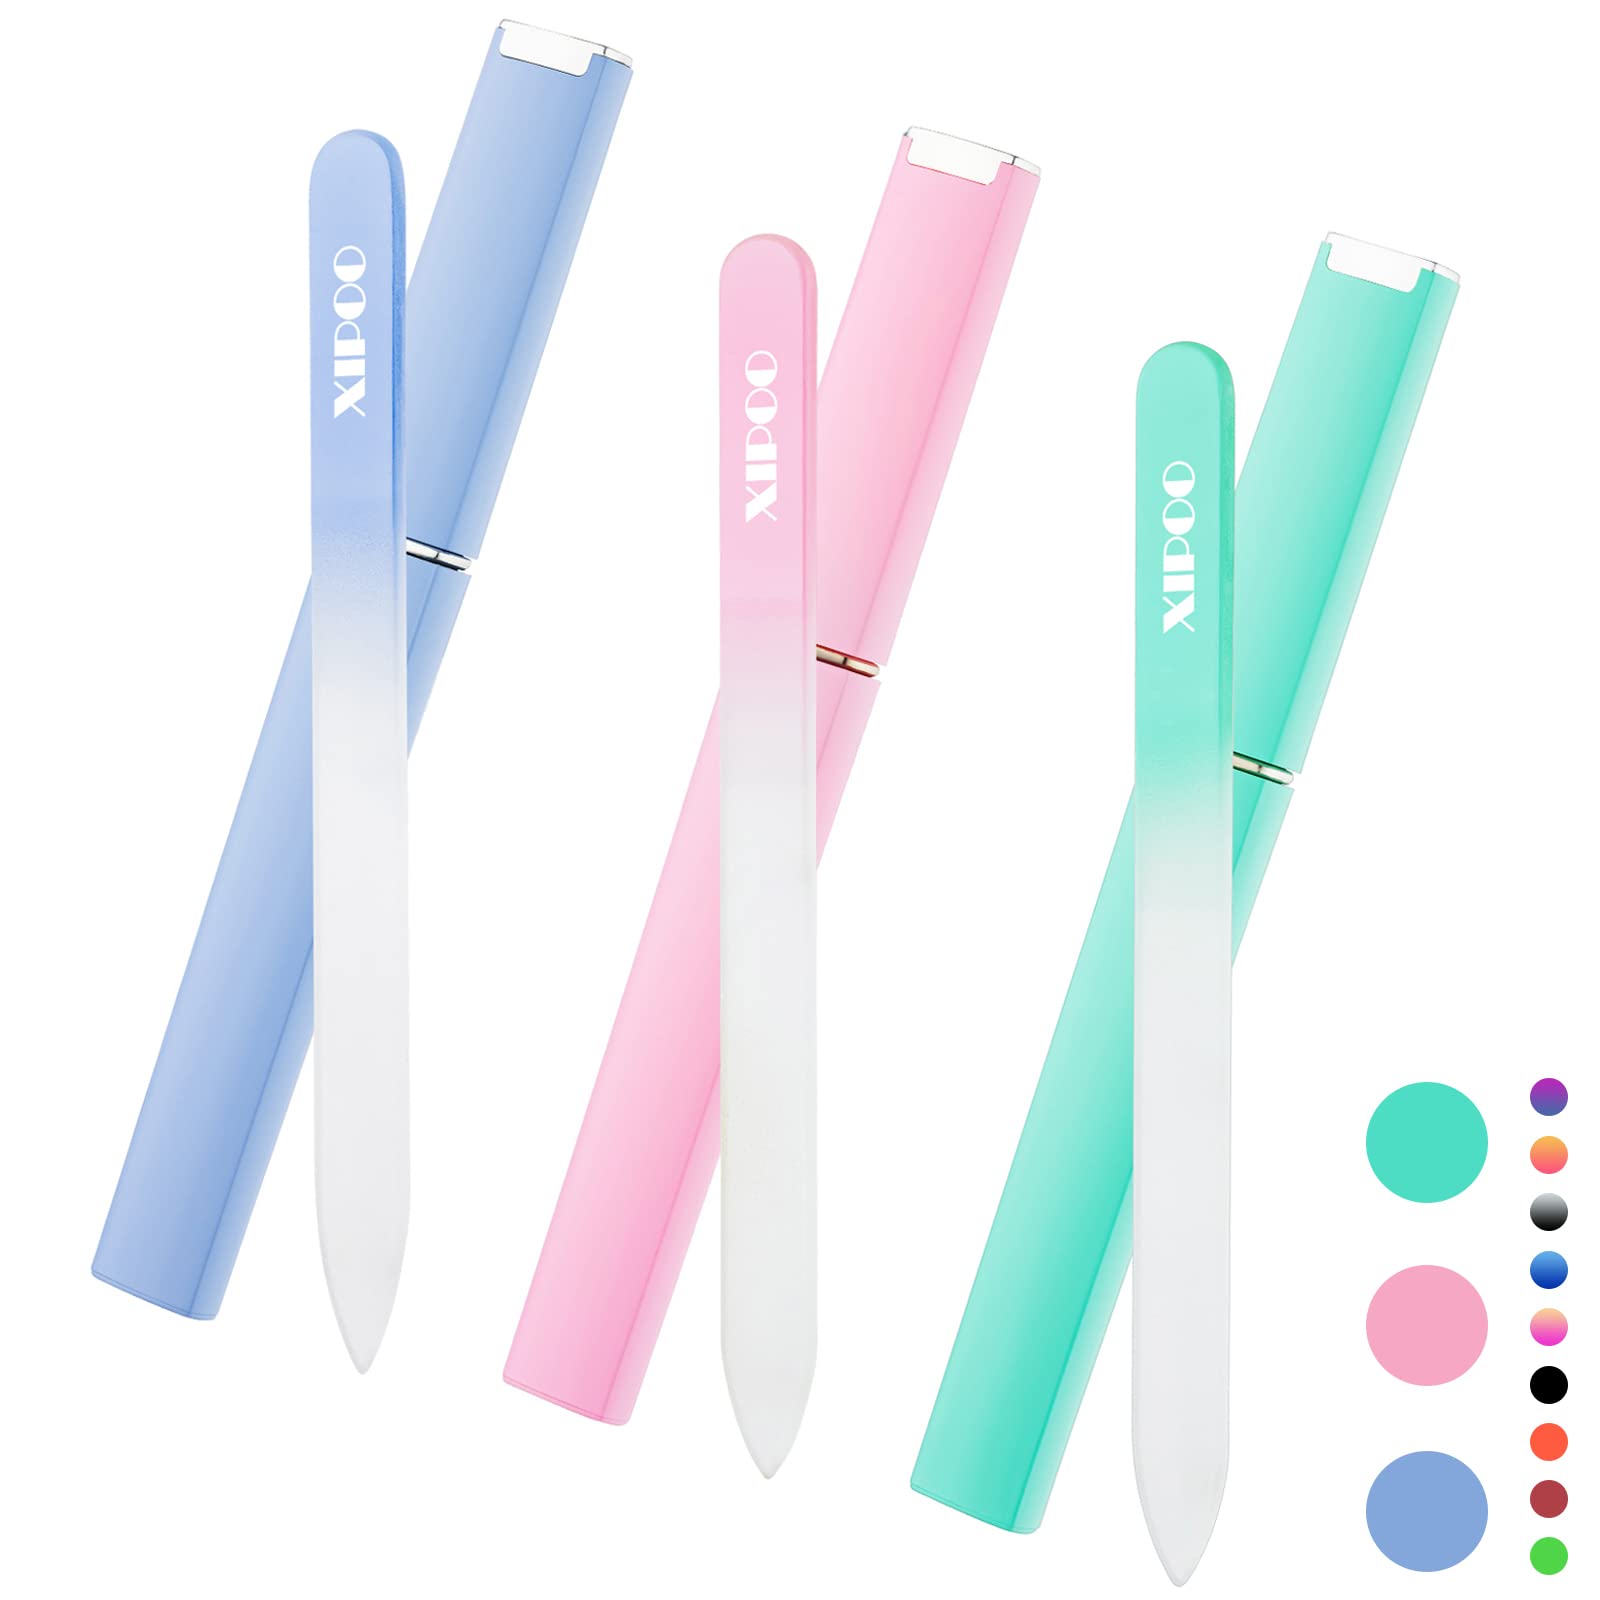 Nail File Glass Nail File 3 Pack Premium Glass Nail File with Case Crystal Nail File Professional Salon Manicure Tool for Natural Nails